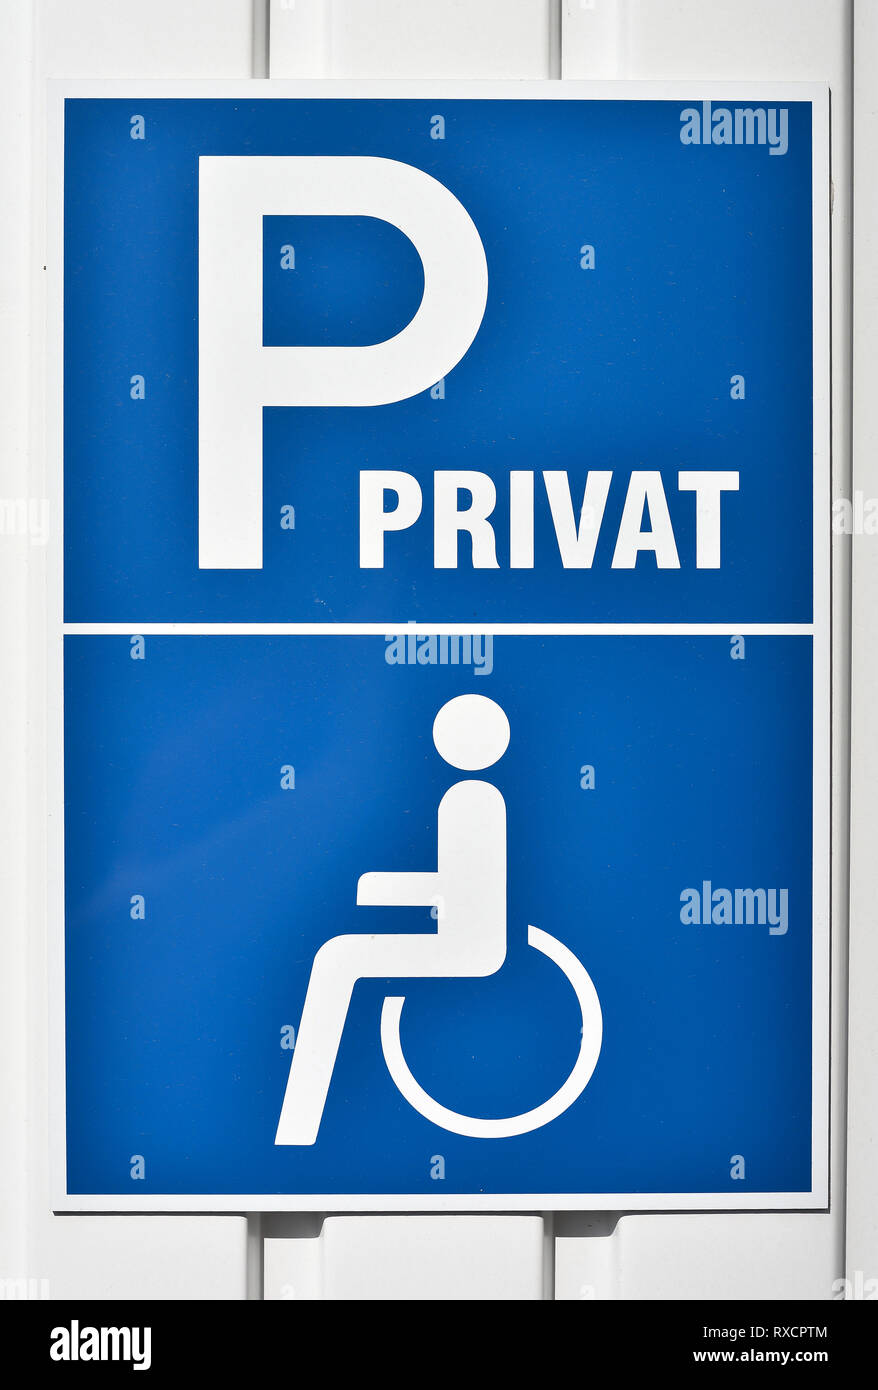 Parking for the disabled Stock Photo